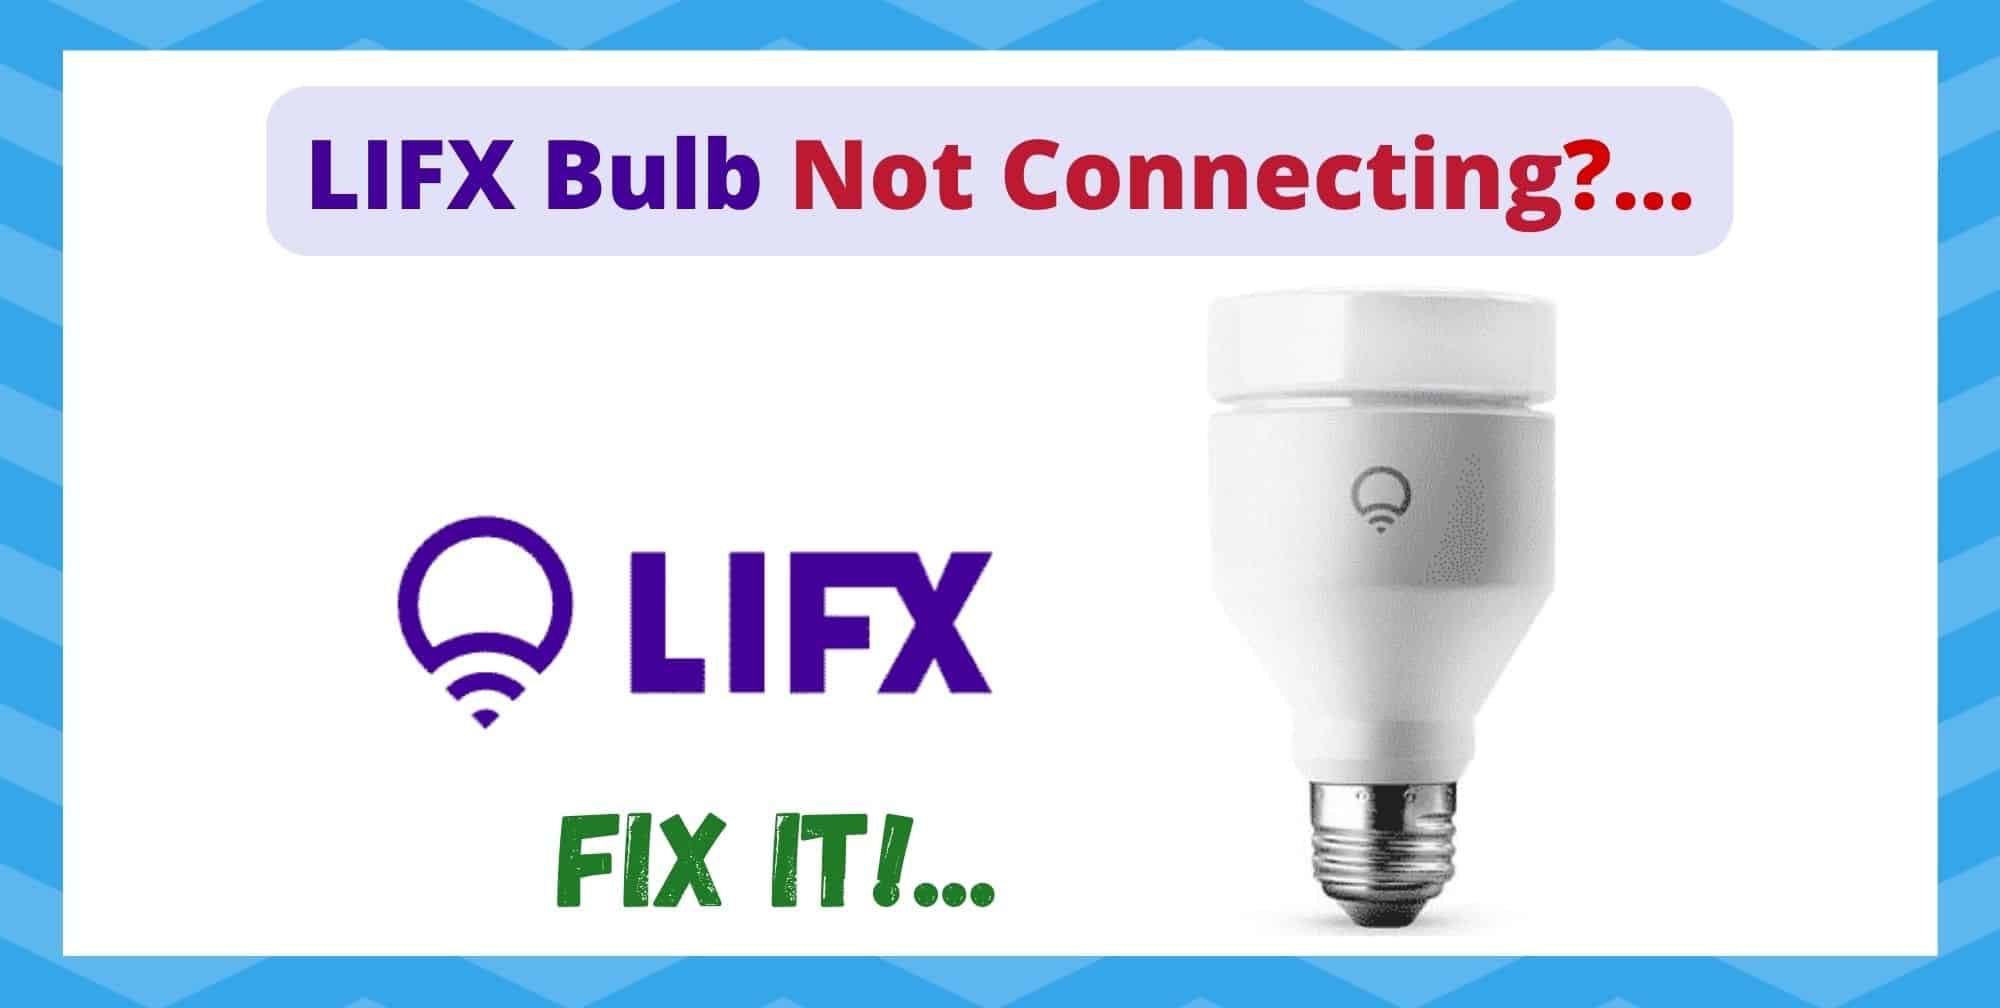 LIFX Bulb Not Connecting